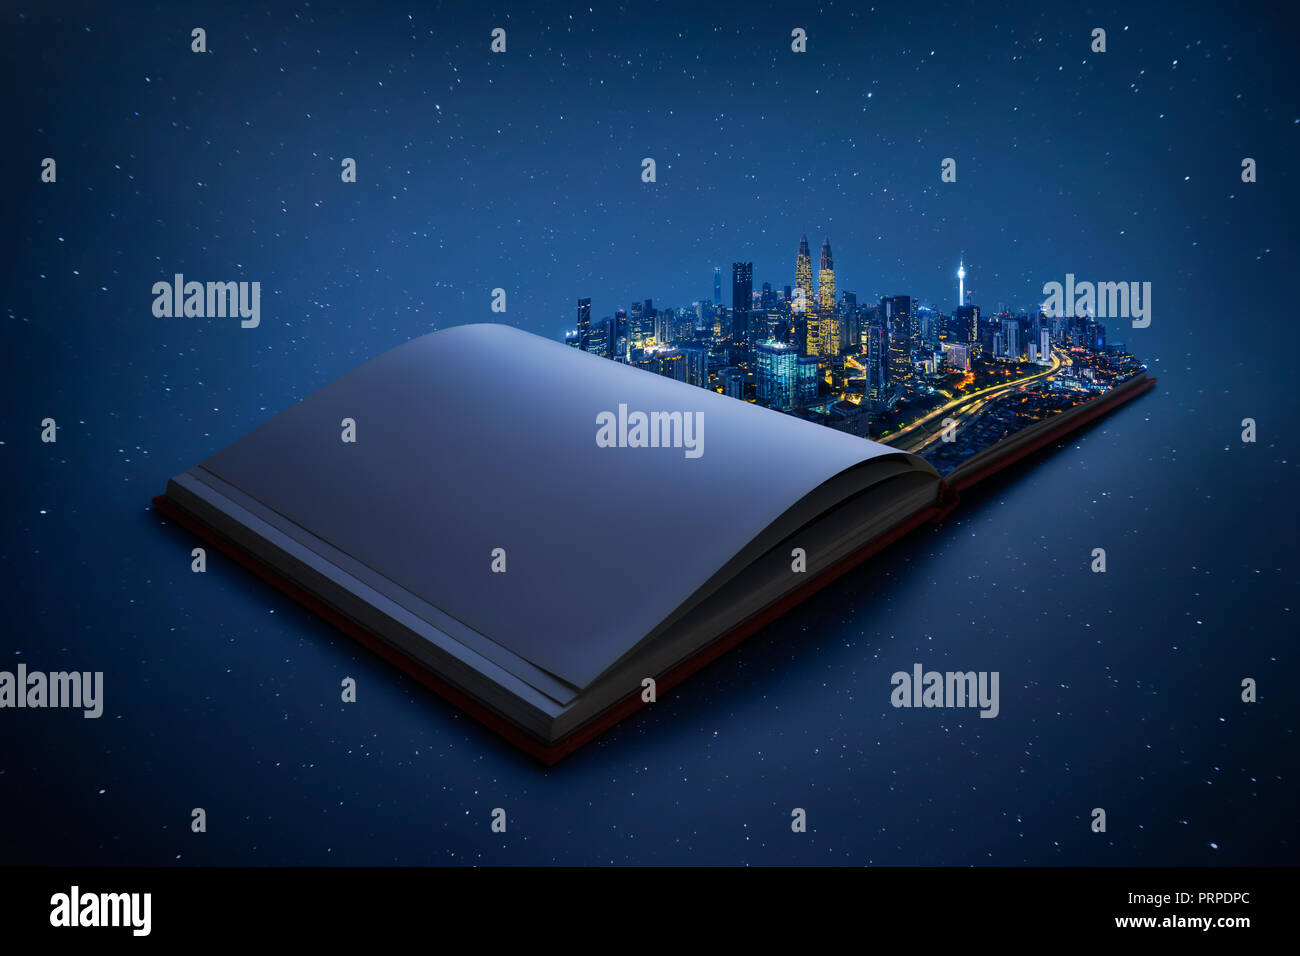 Night beautiful scene of modern city skyline pop up in the open book pages. Stock Photo